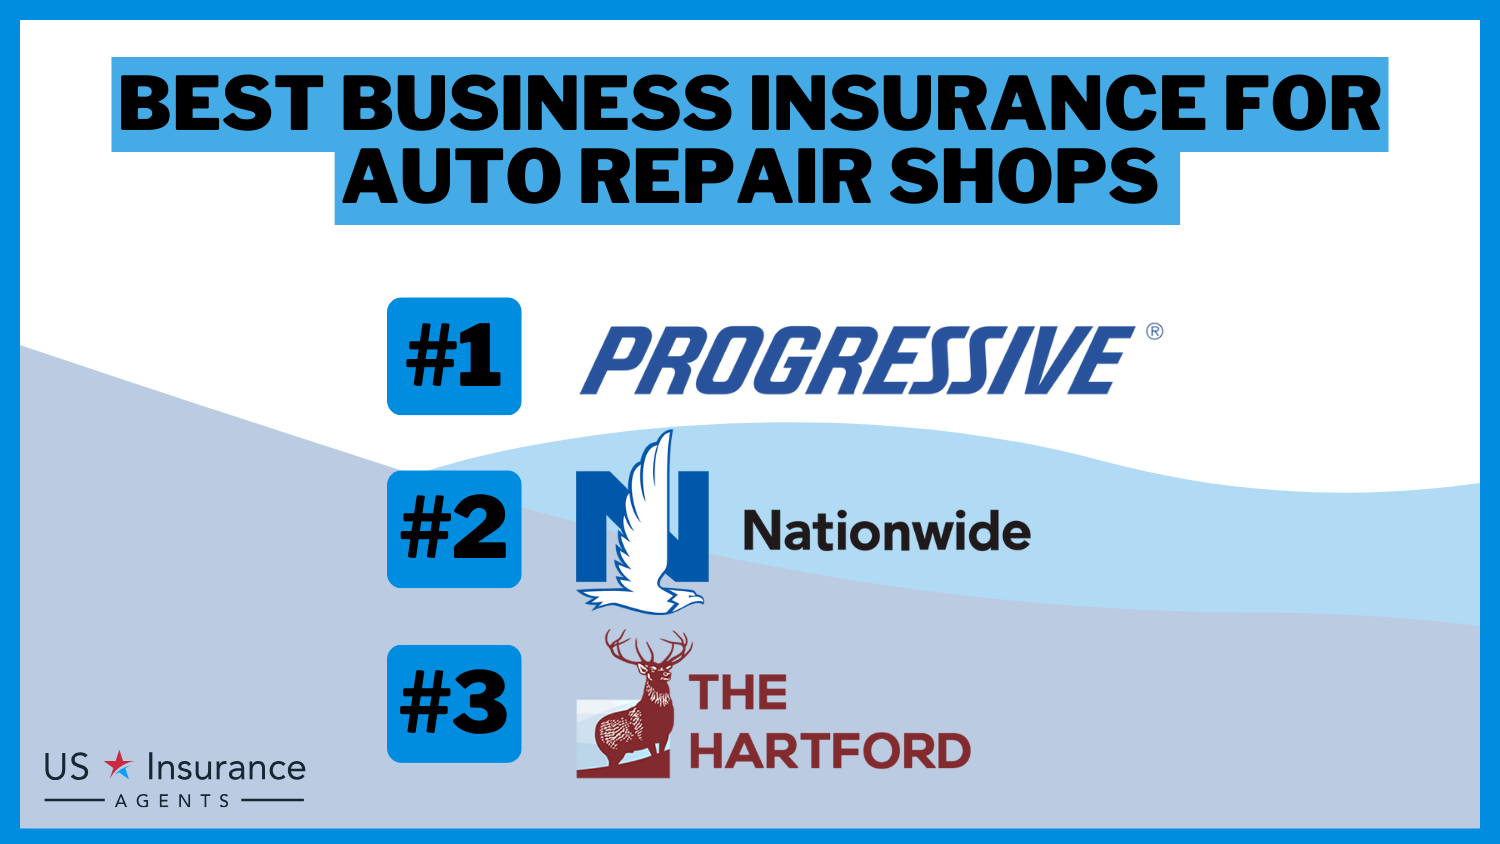 3 Best Business Insurance for Auto Repair Shops: Progressive, Nationwide and The Hartford